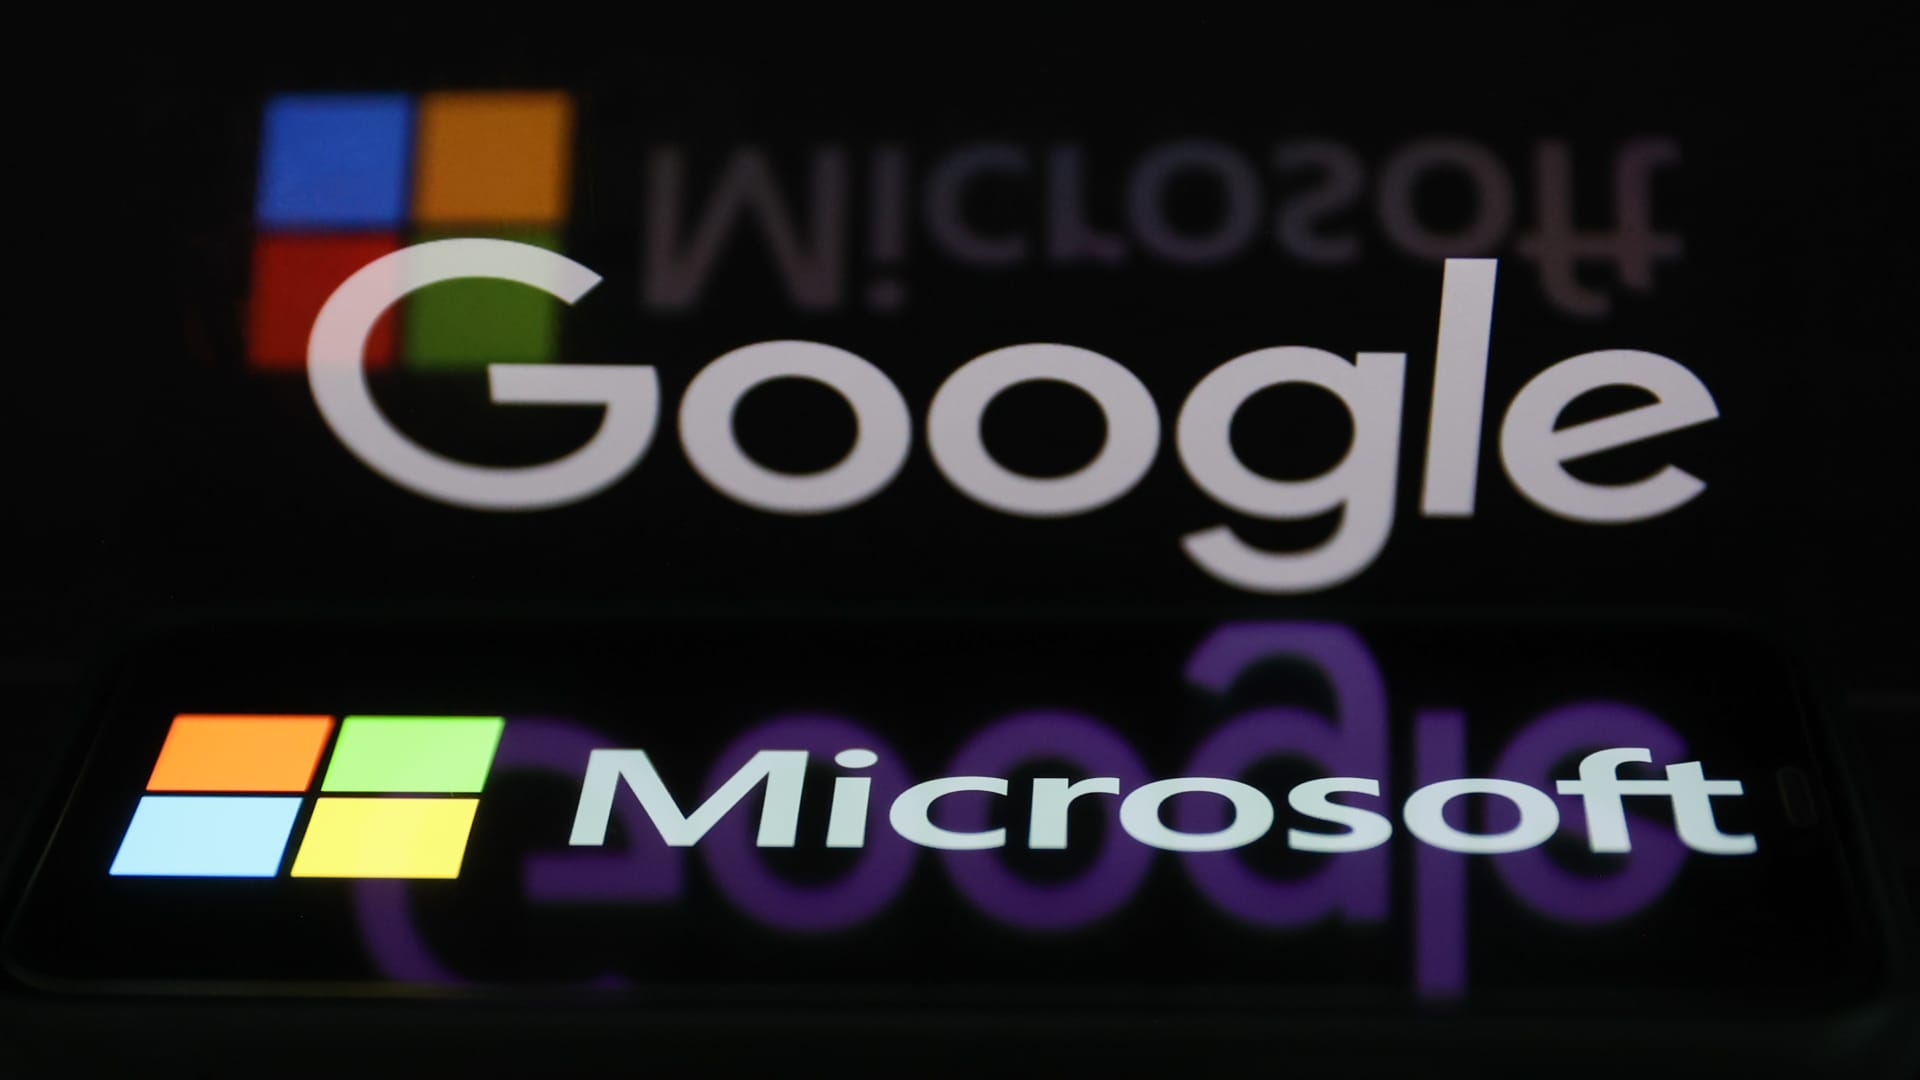 Alphabet shares dip on report Samsung phones may switch to Microsoft Bing search